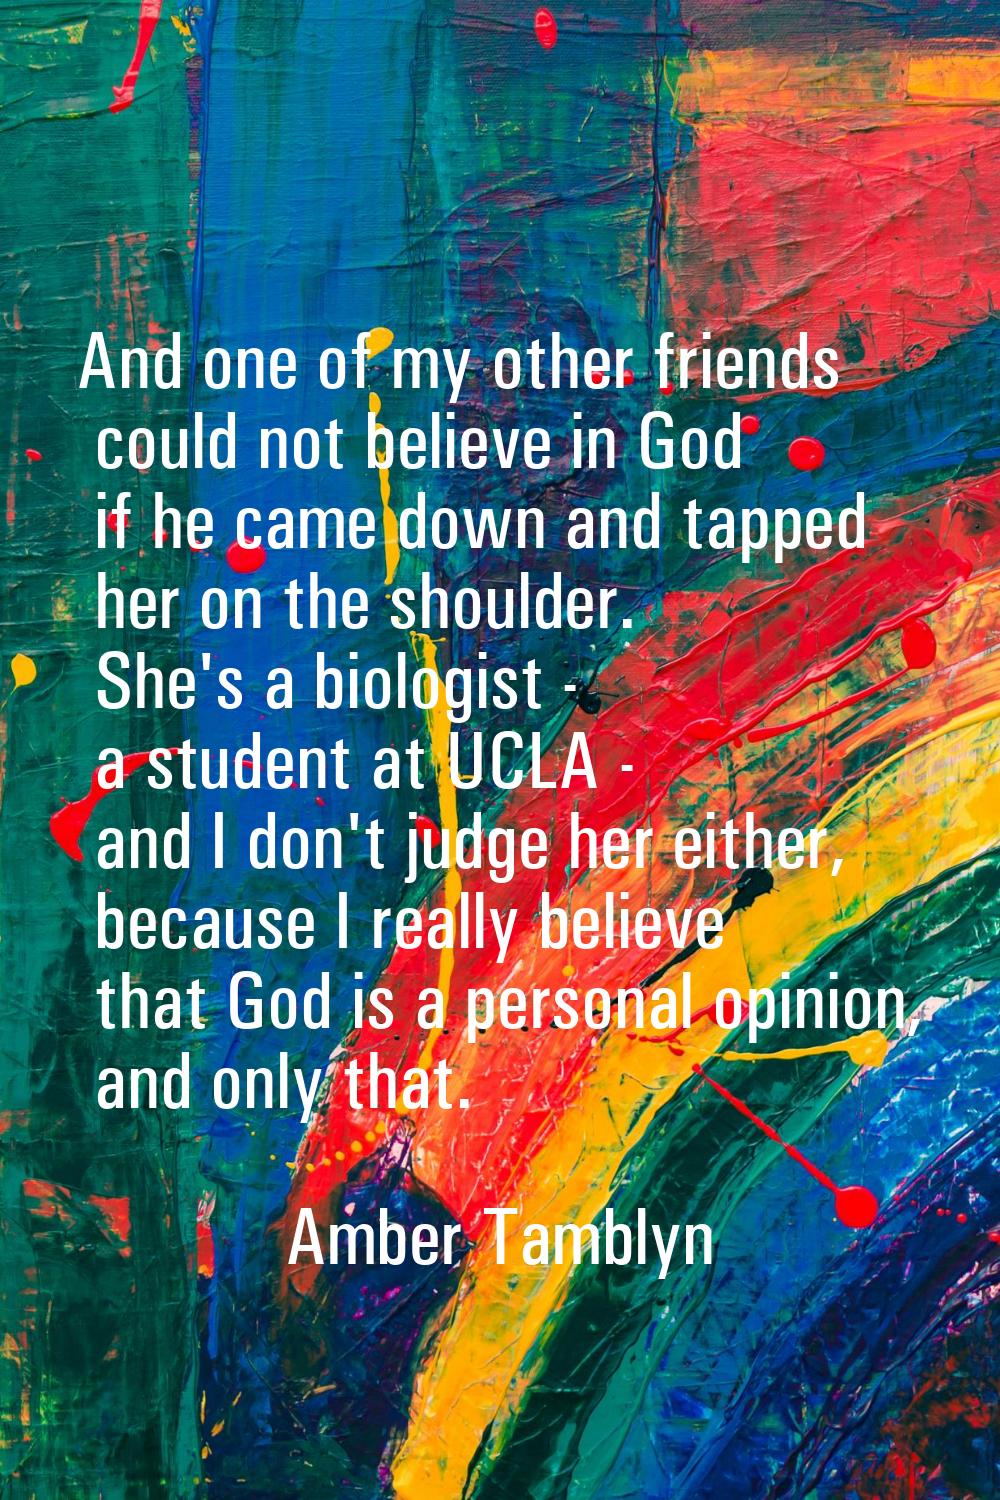 And one of my other friends could not believe in God if he came down and tapped her on the shoulder